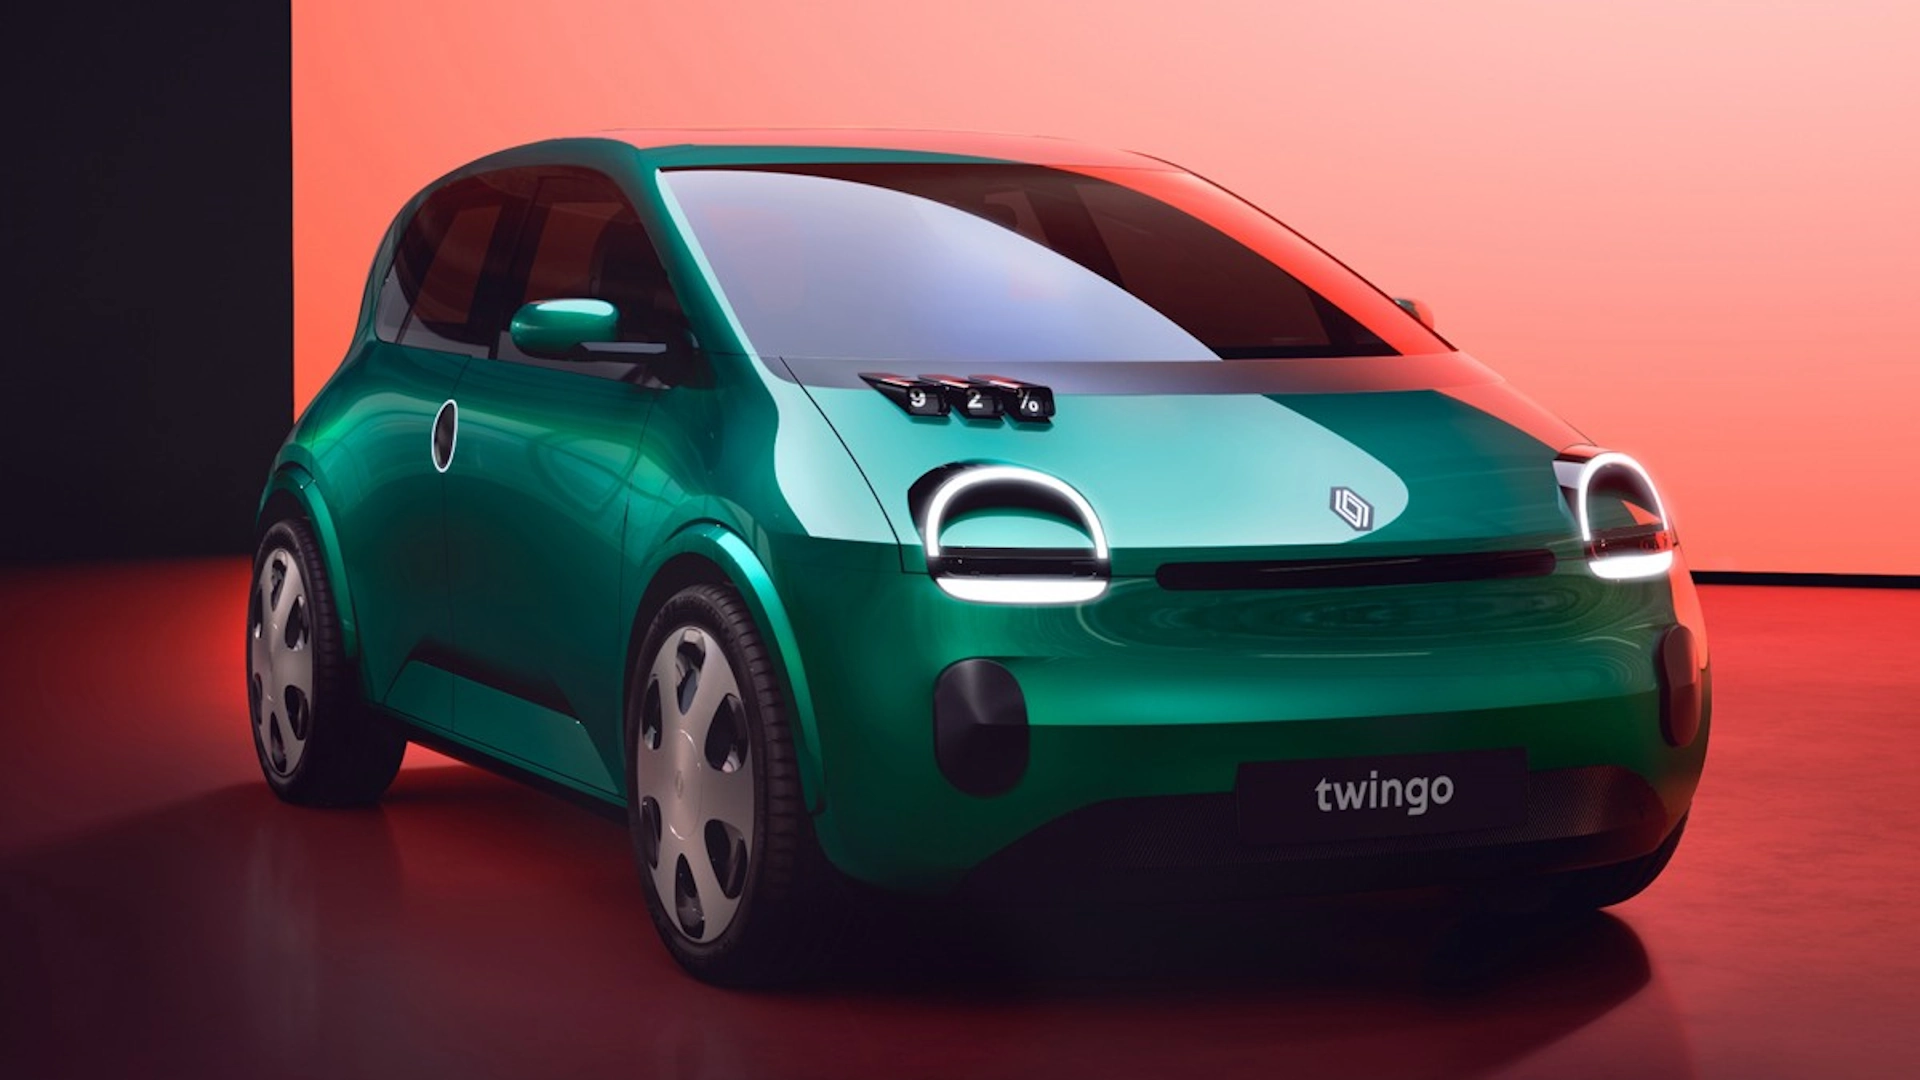 Renault Twingo EV is a new concept of a small city car that will cost “under 20 thousand euros”